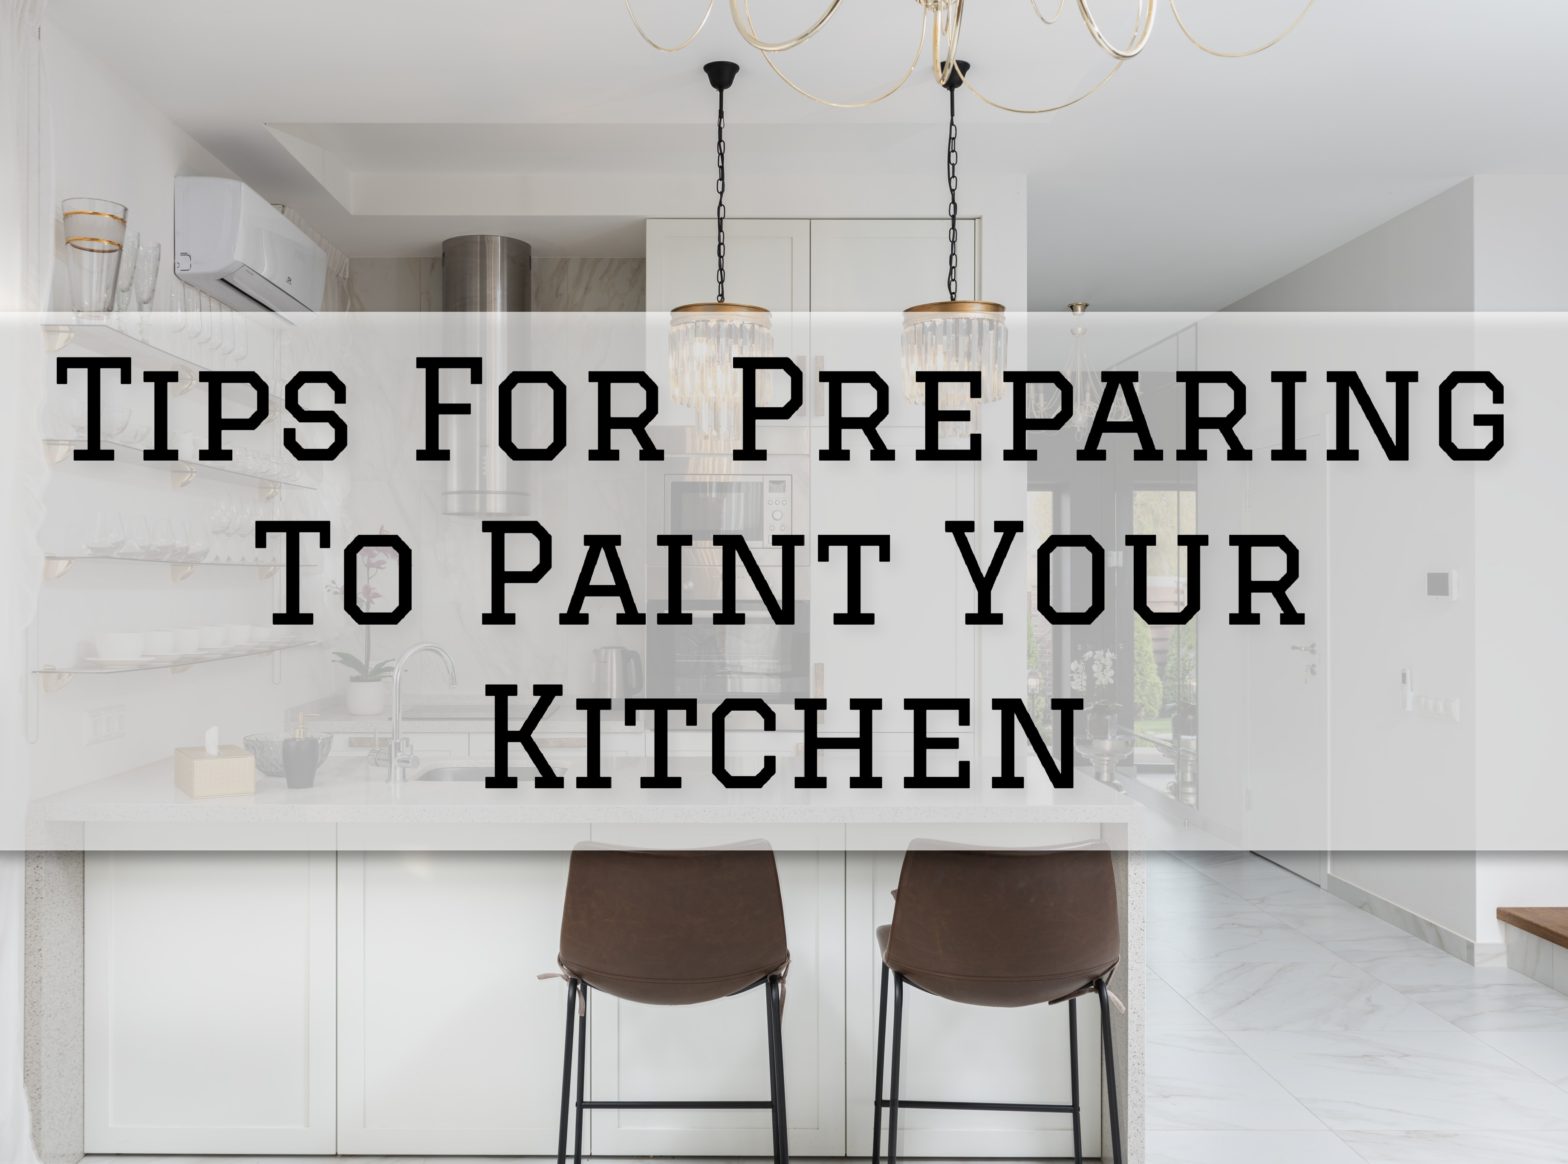 2022-11-15 Painting and Wallpapering Burlington Ontario Tips For Preparing To Paint Your Kitchen